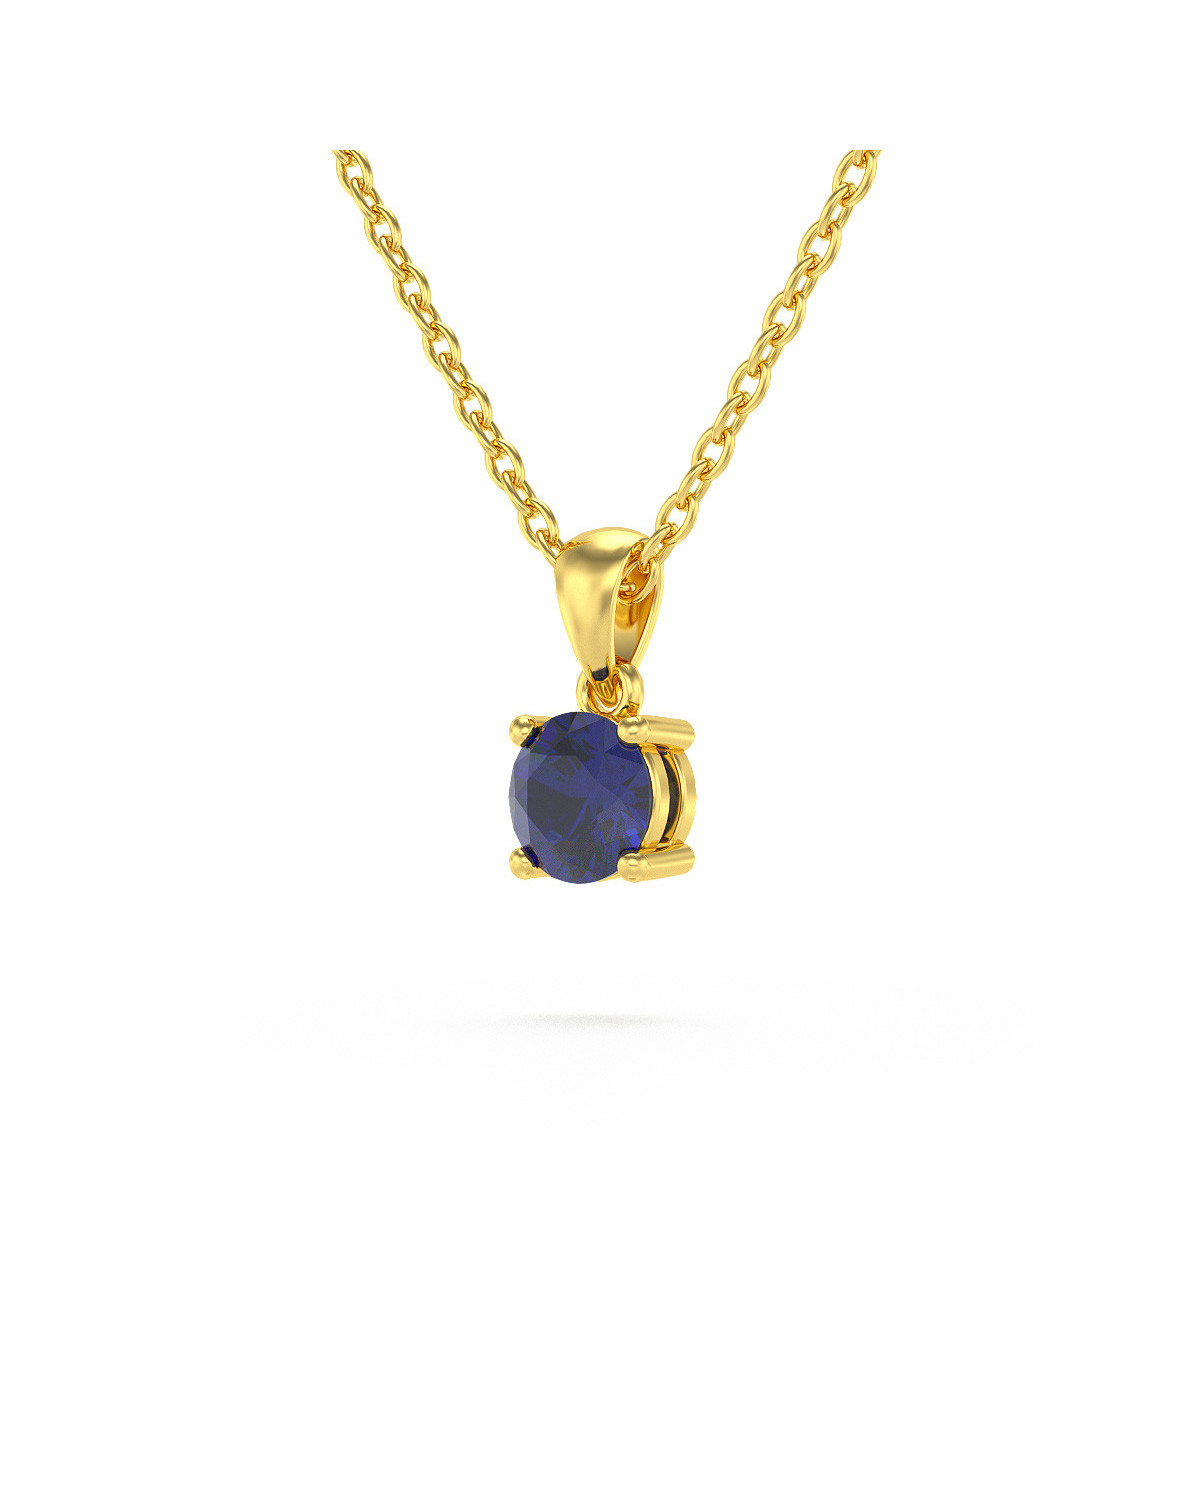 California Dreaming Yellow Gold Blue Sapphire Solitaire Necklace –  AnaKatarina Design